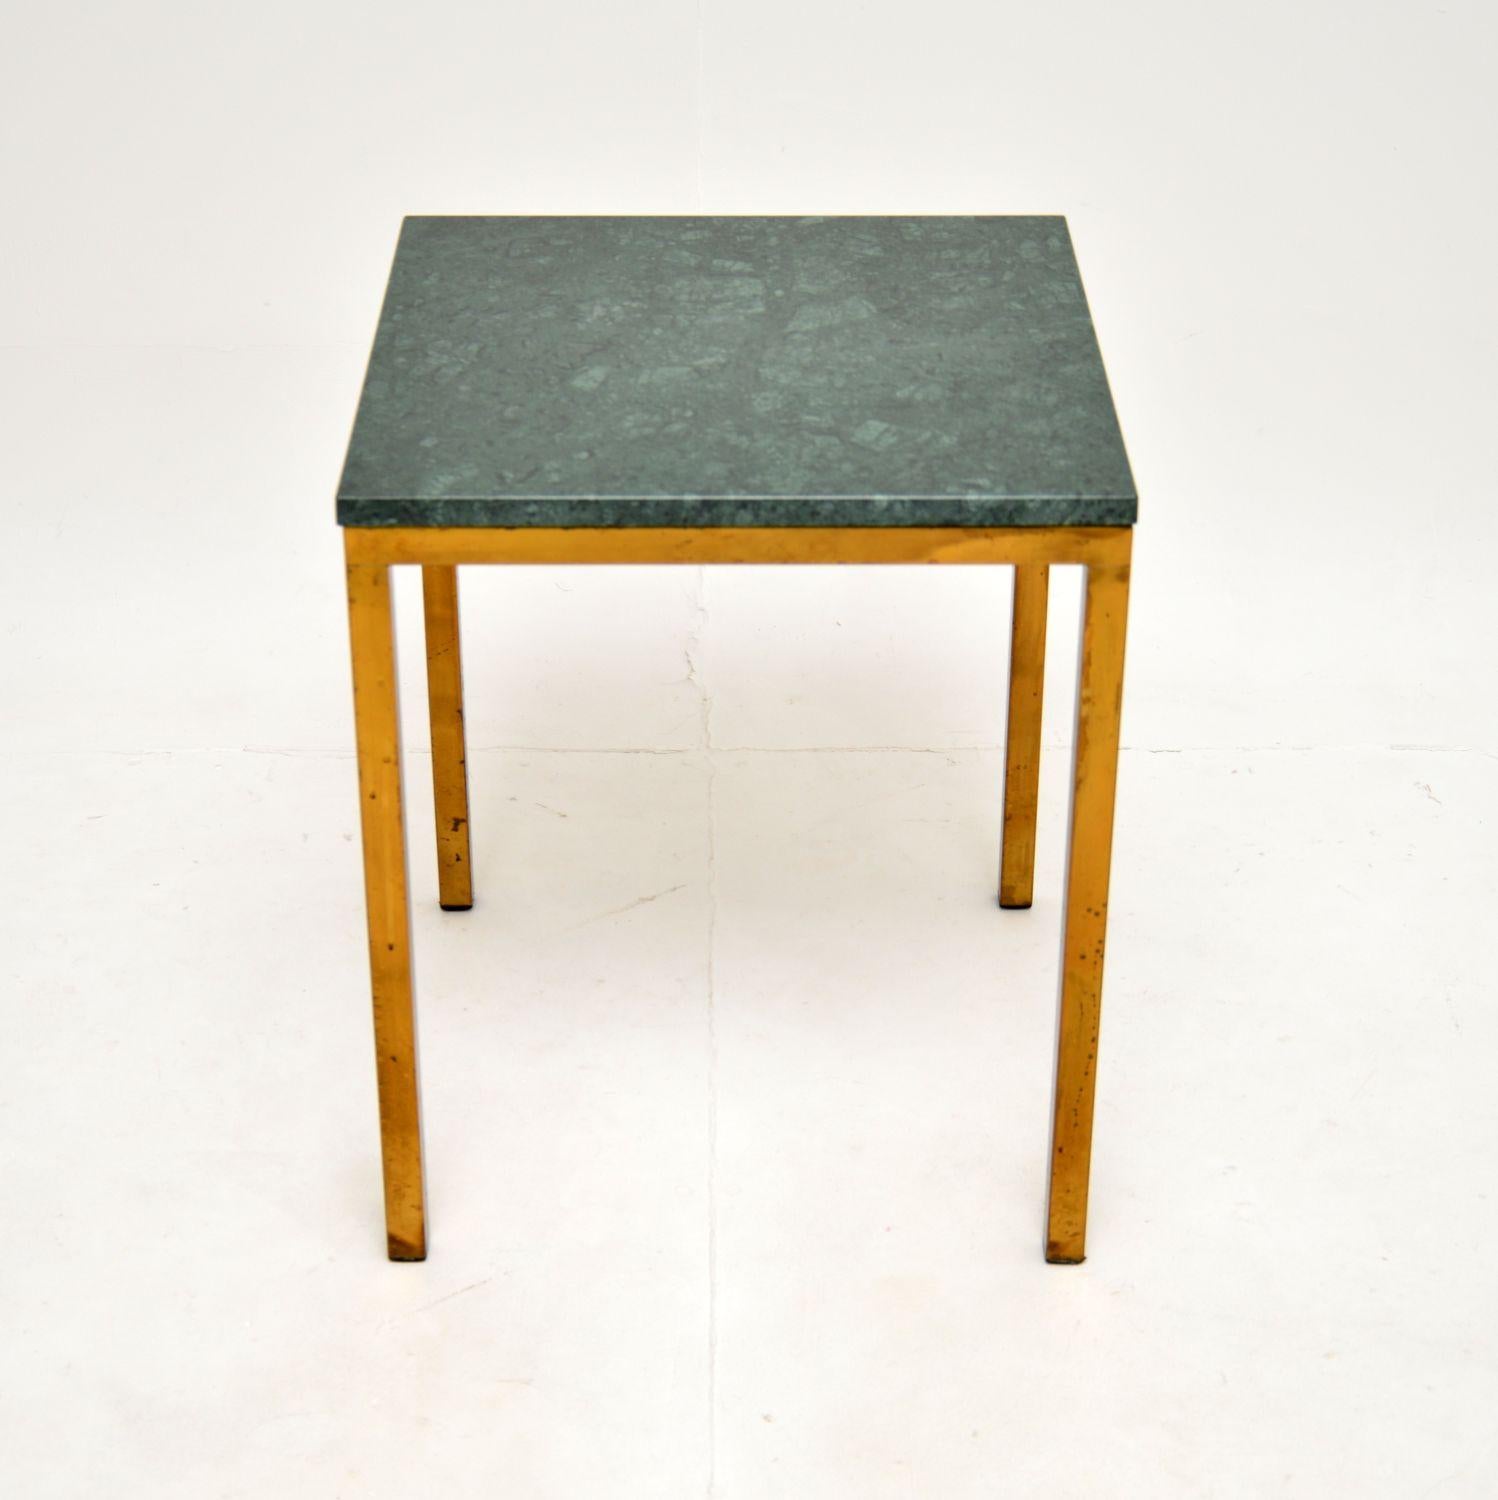 A stylish and very well made vintage Italian brass & marble side table. This was made in Italy, it dates from around the 1970’s.

The frame is of super quality, it is solid brass and has acquired a lovely patina over the years. The green marble top